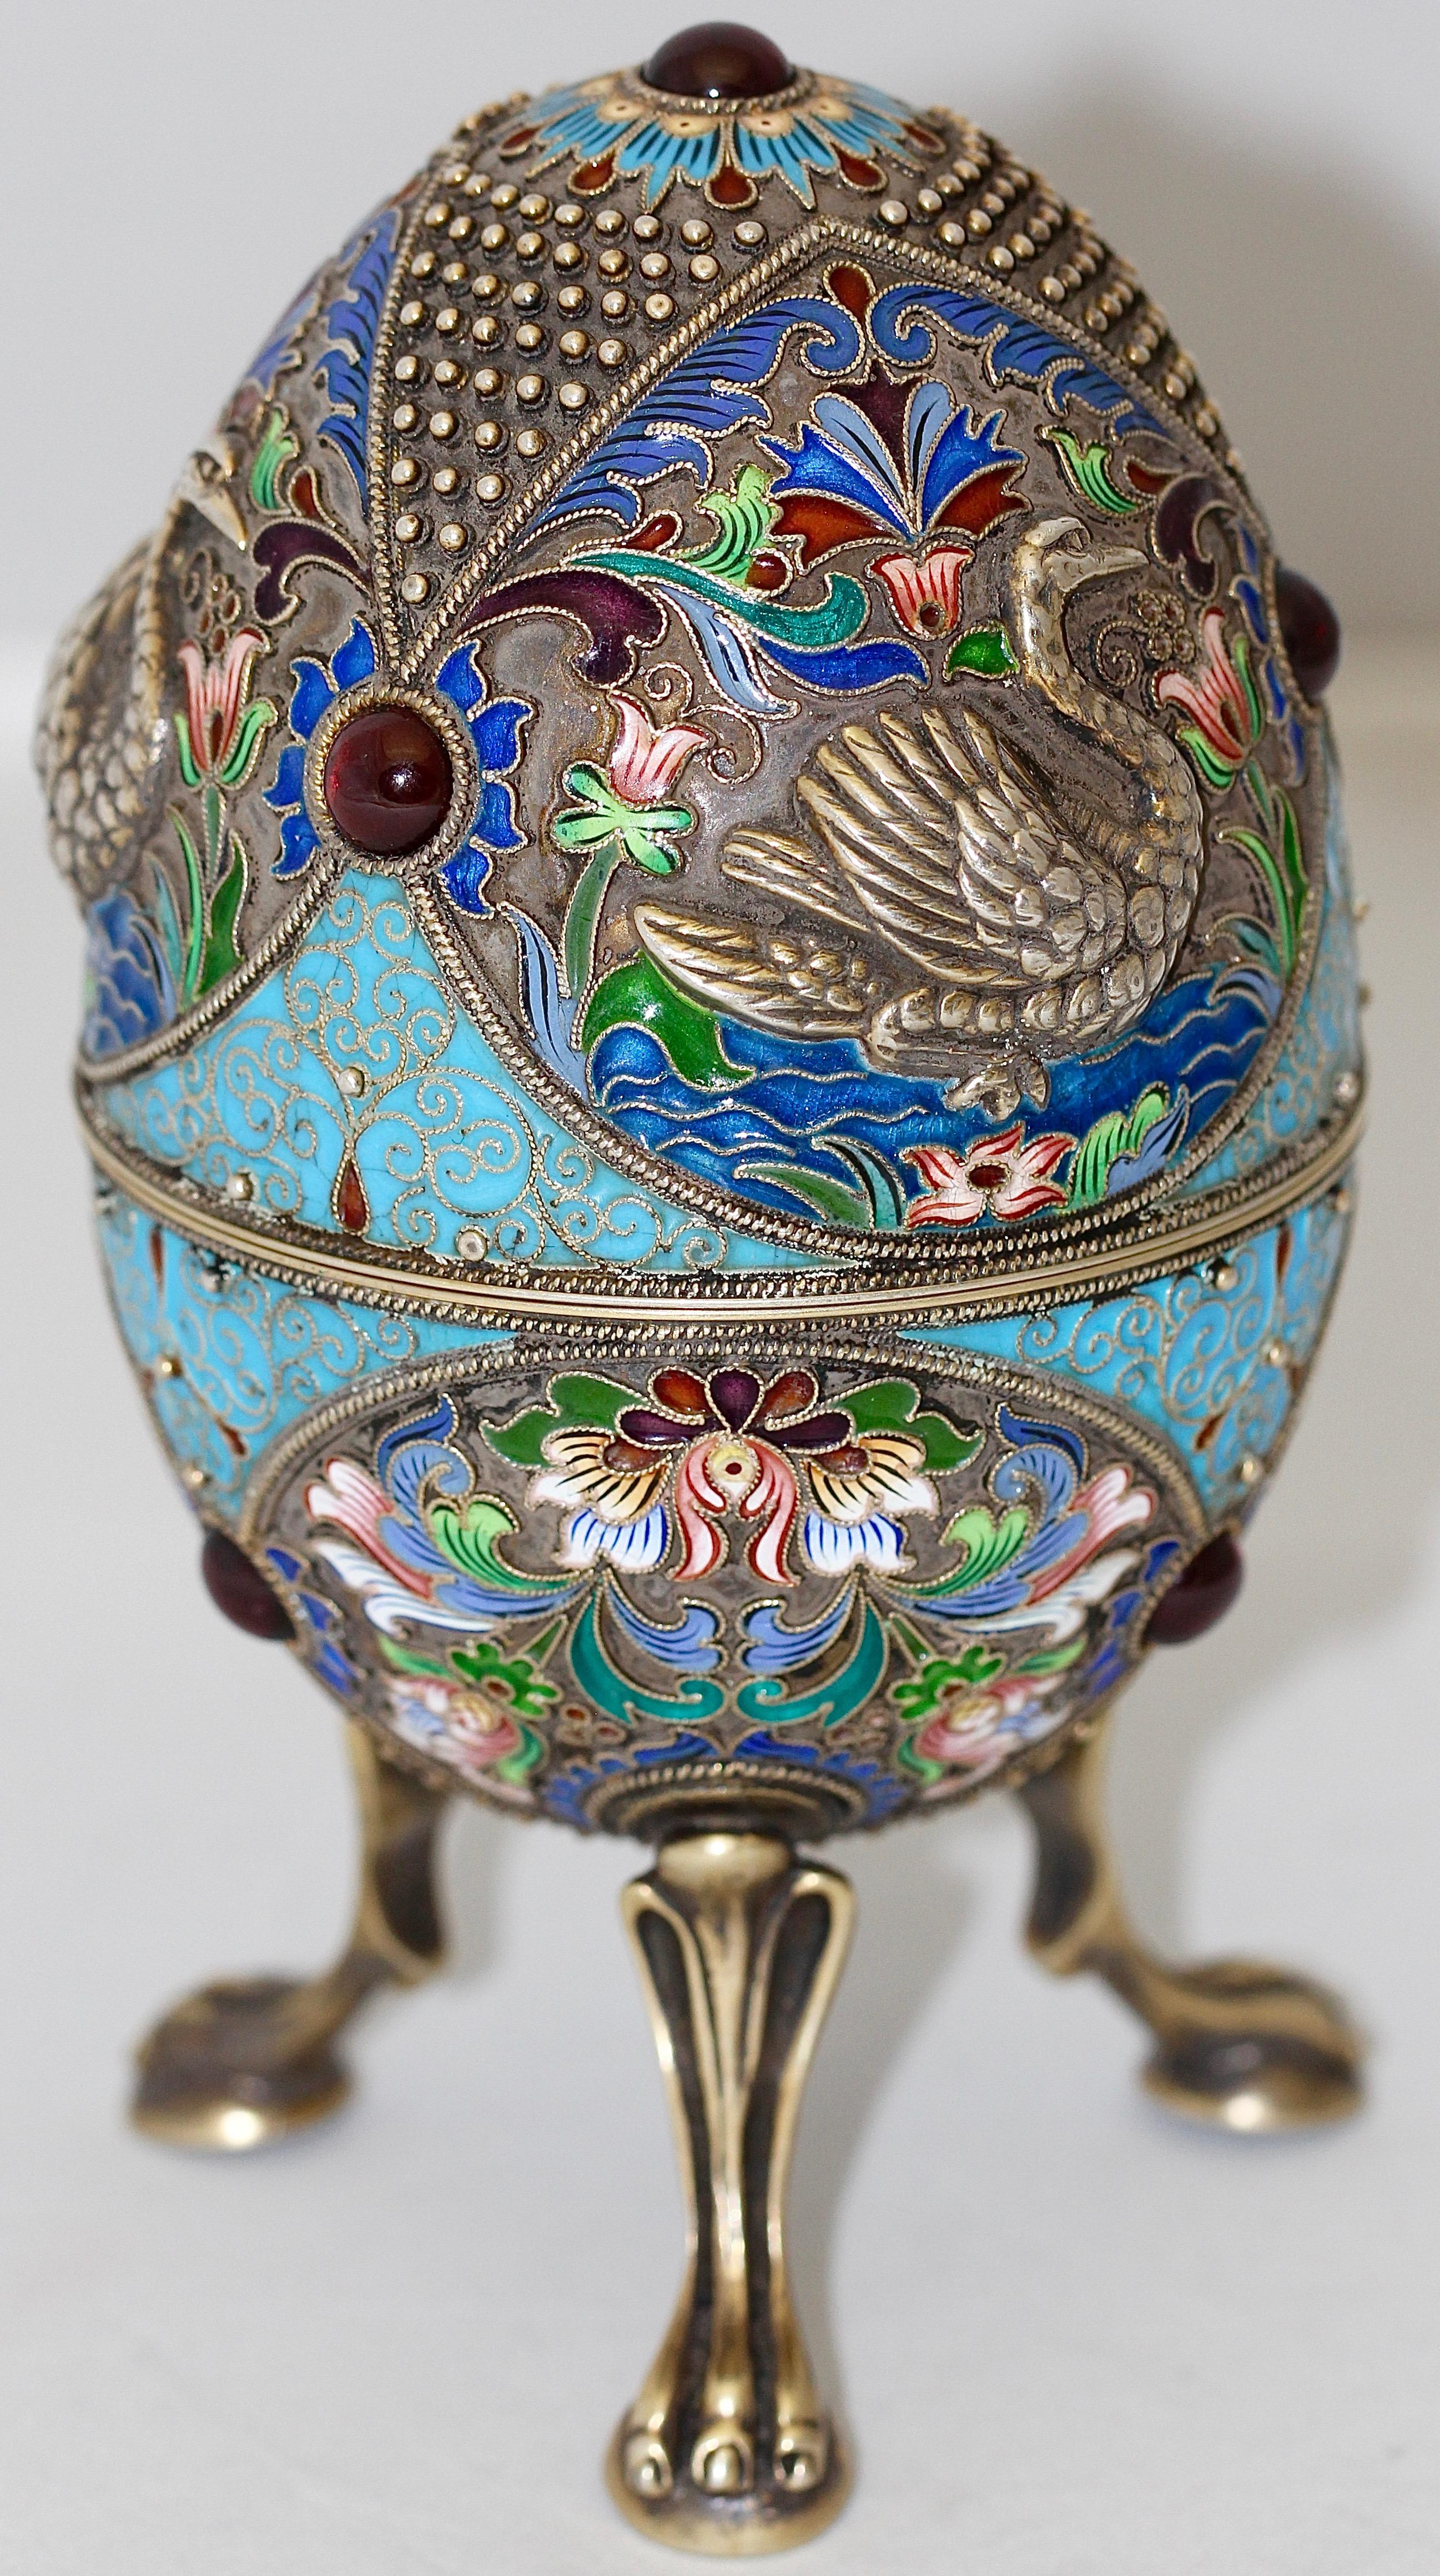 Russian Faberge Style Cloisonne Enamel Egg. 84 Silver H3 (NZ).

A beautifully shaped Russian silver-gilt and cloisonné enamel egg. Abundantly decorated with floral motives and swans. Set with red cabochon cut stones, probably garnets. On three lion